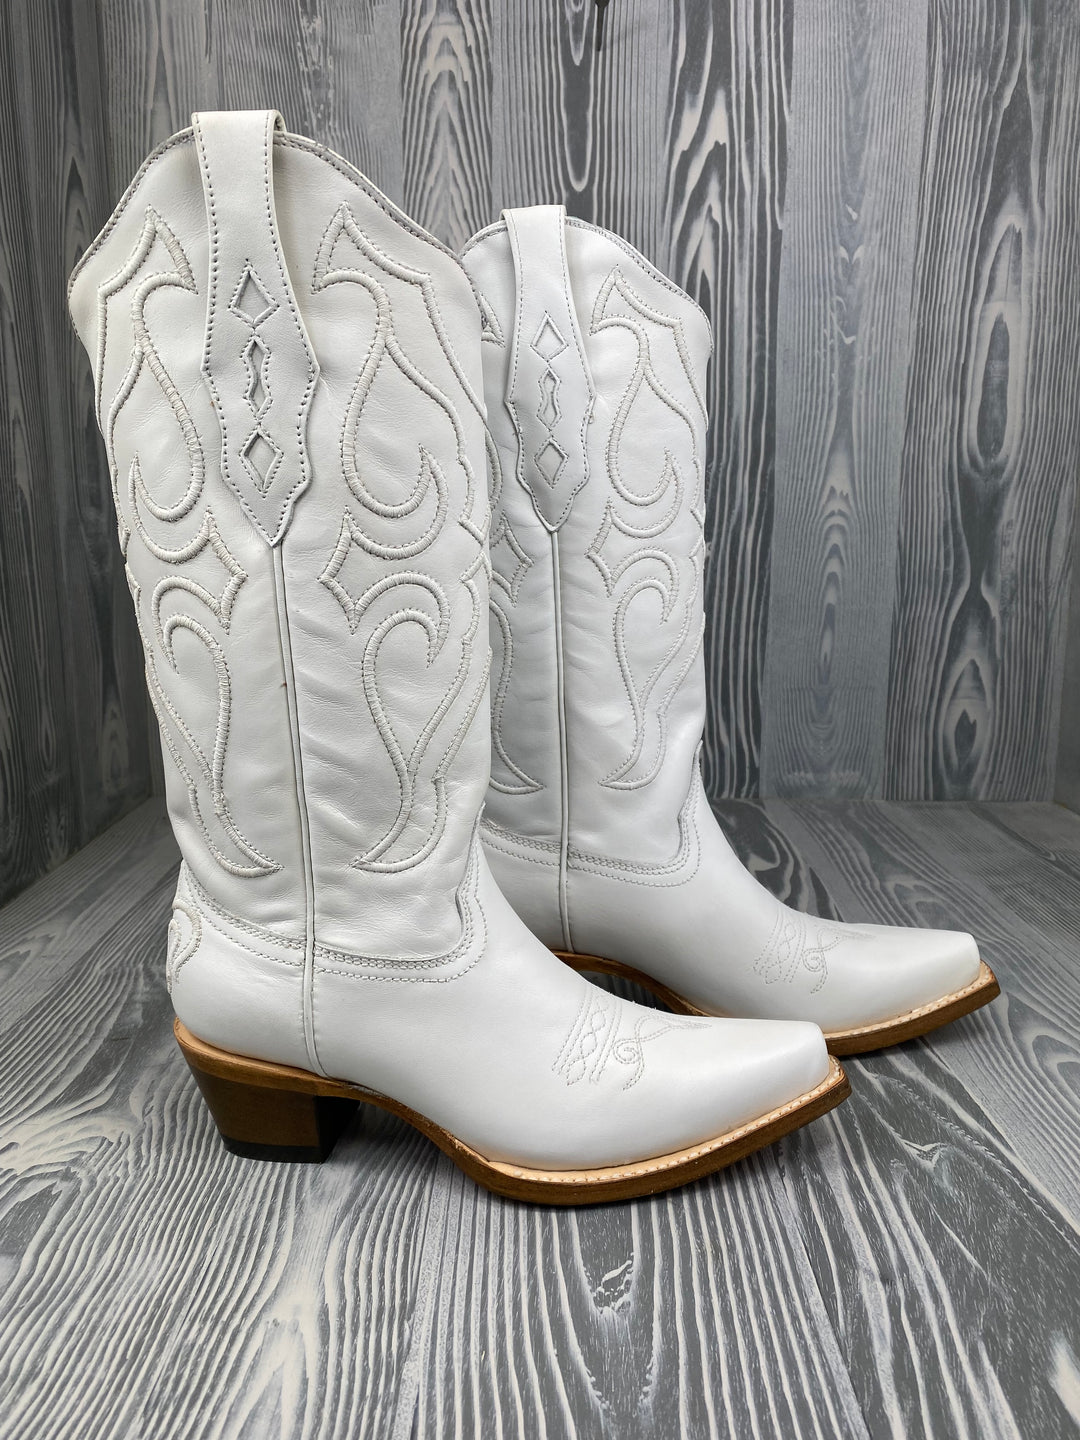 Bottes western Corral All White Cowgirl pour femmes - Z5046